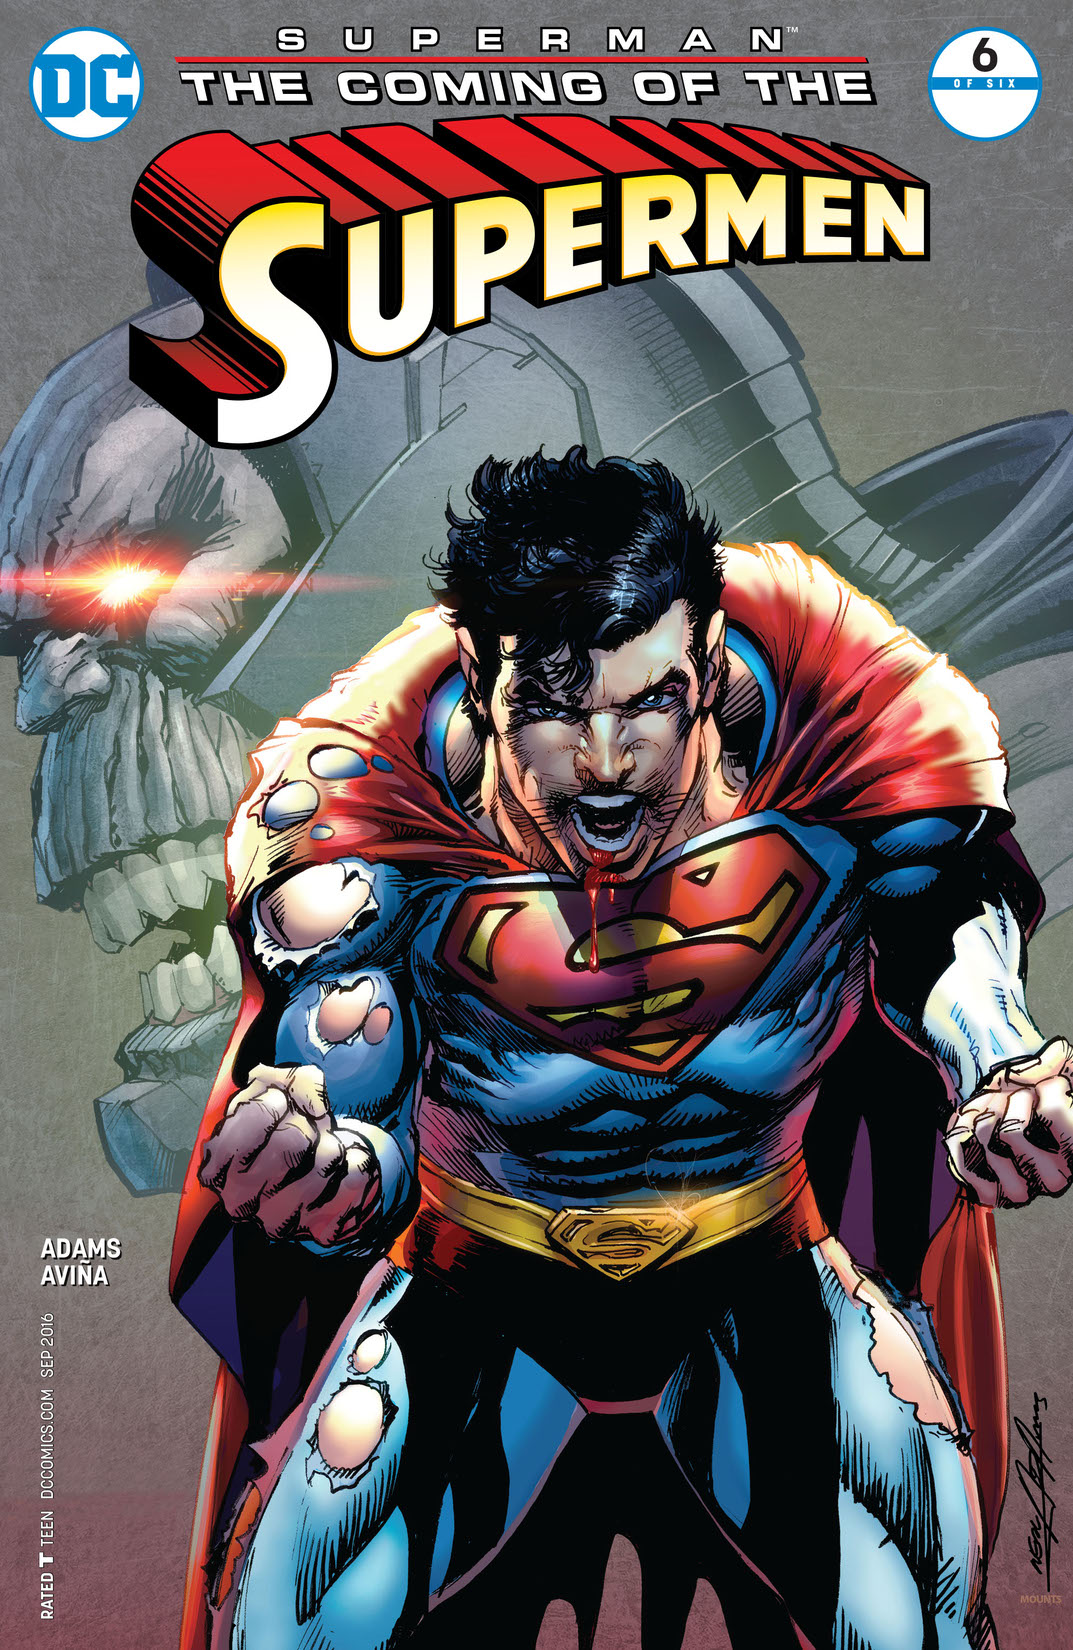 Superman: The Coming of the Supermen #6 preview images